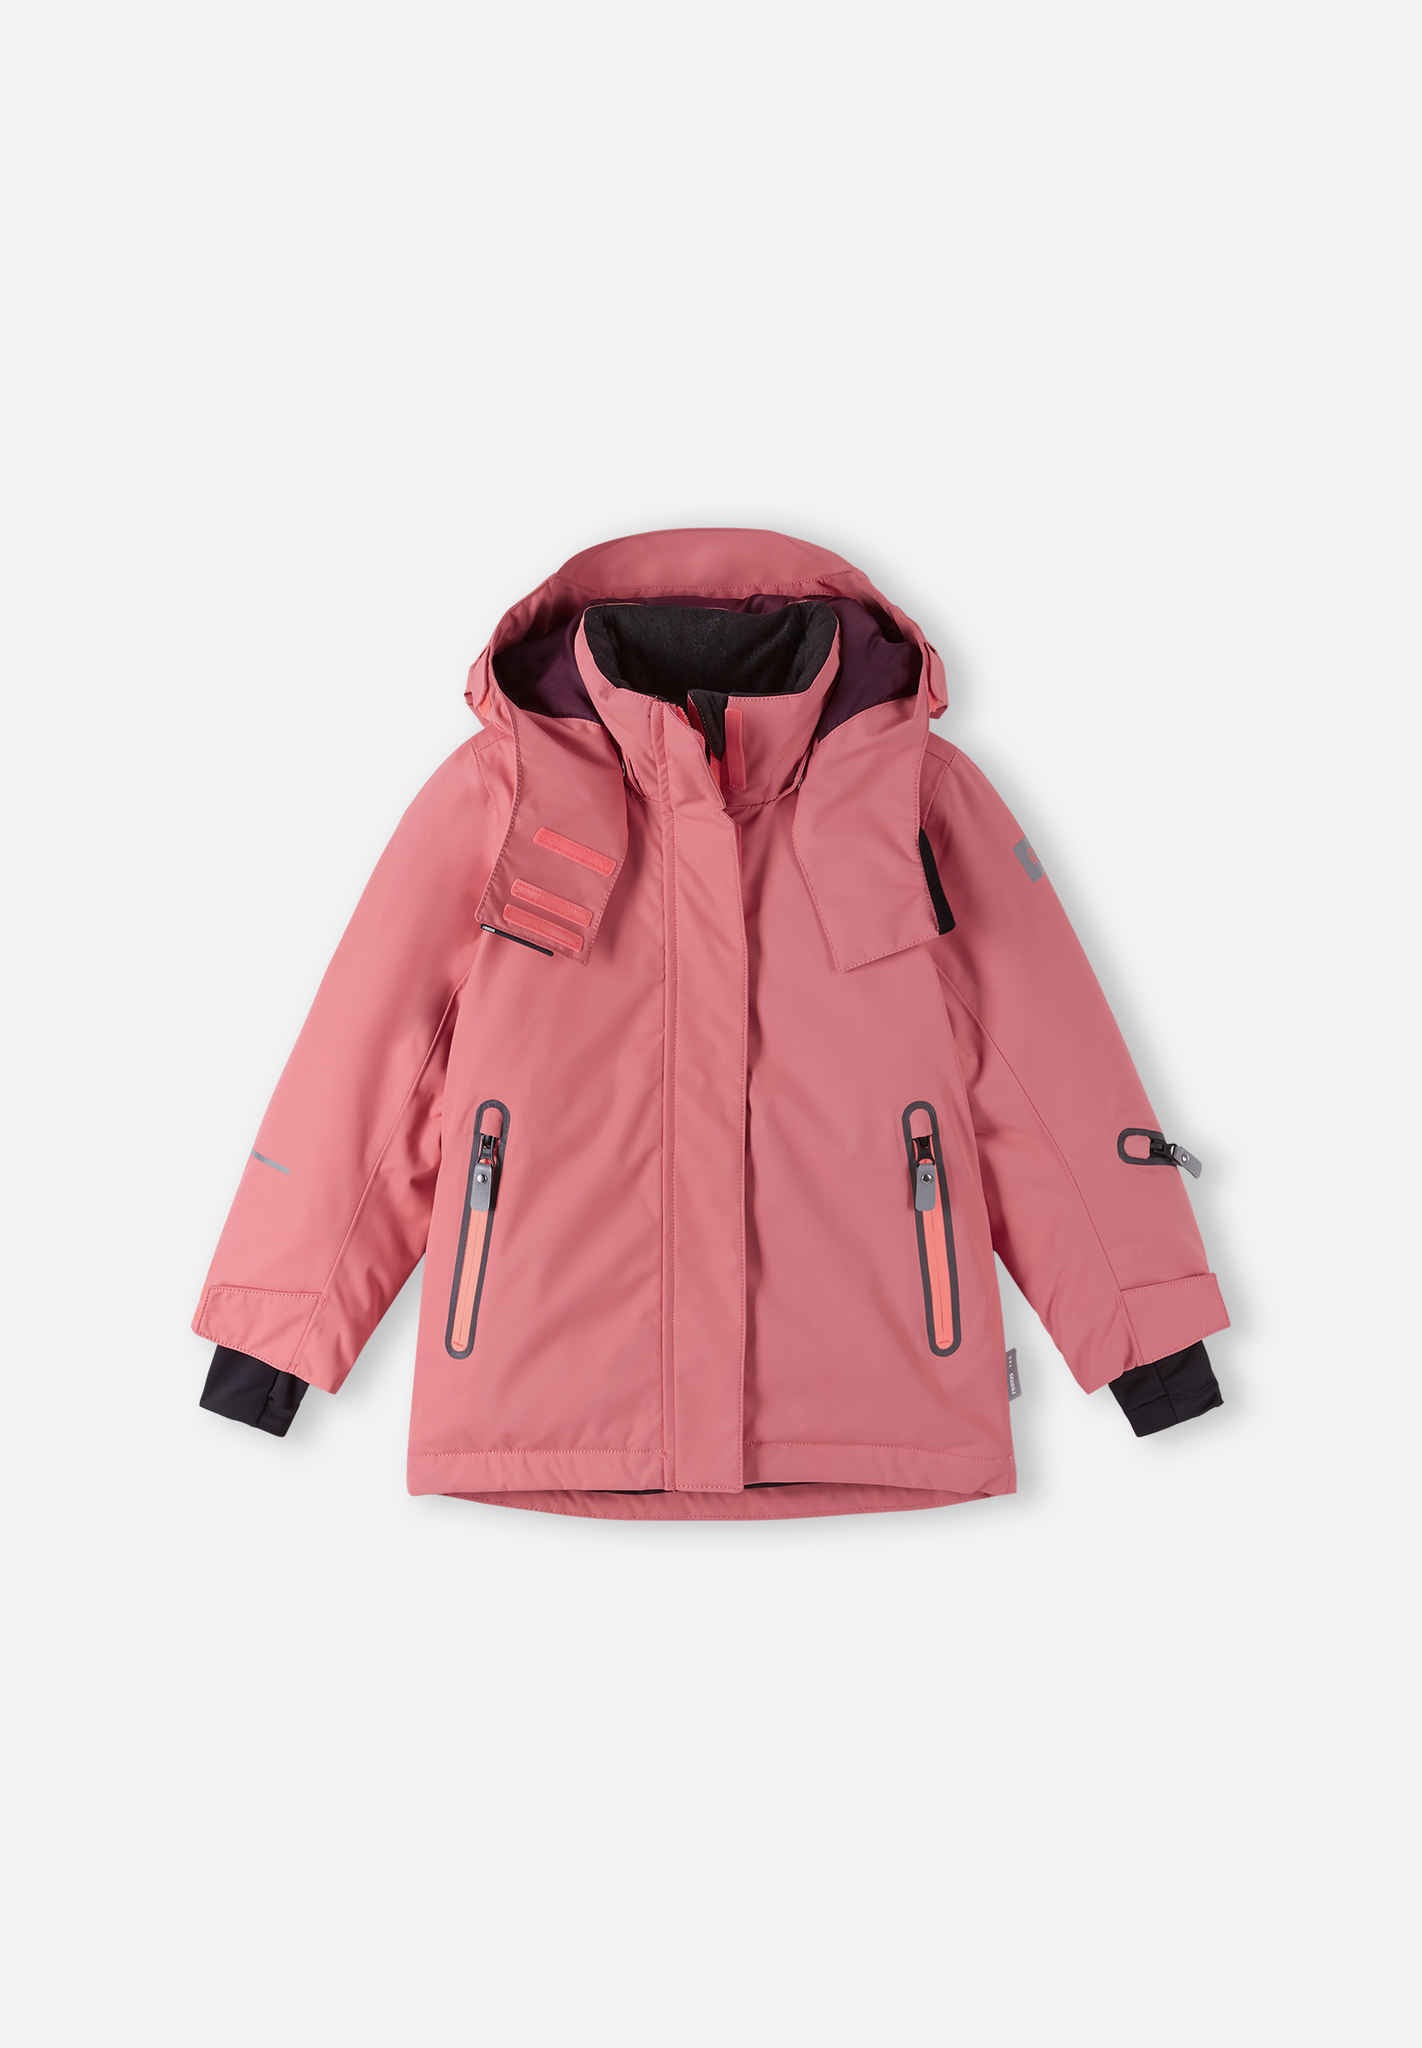 Shop Durable Kids Outerwear from Reima US